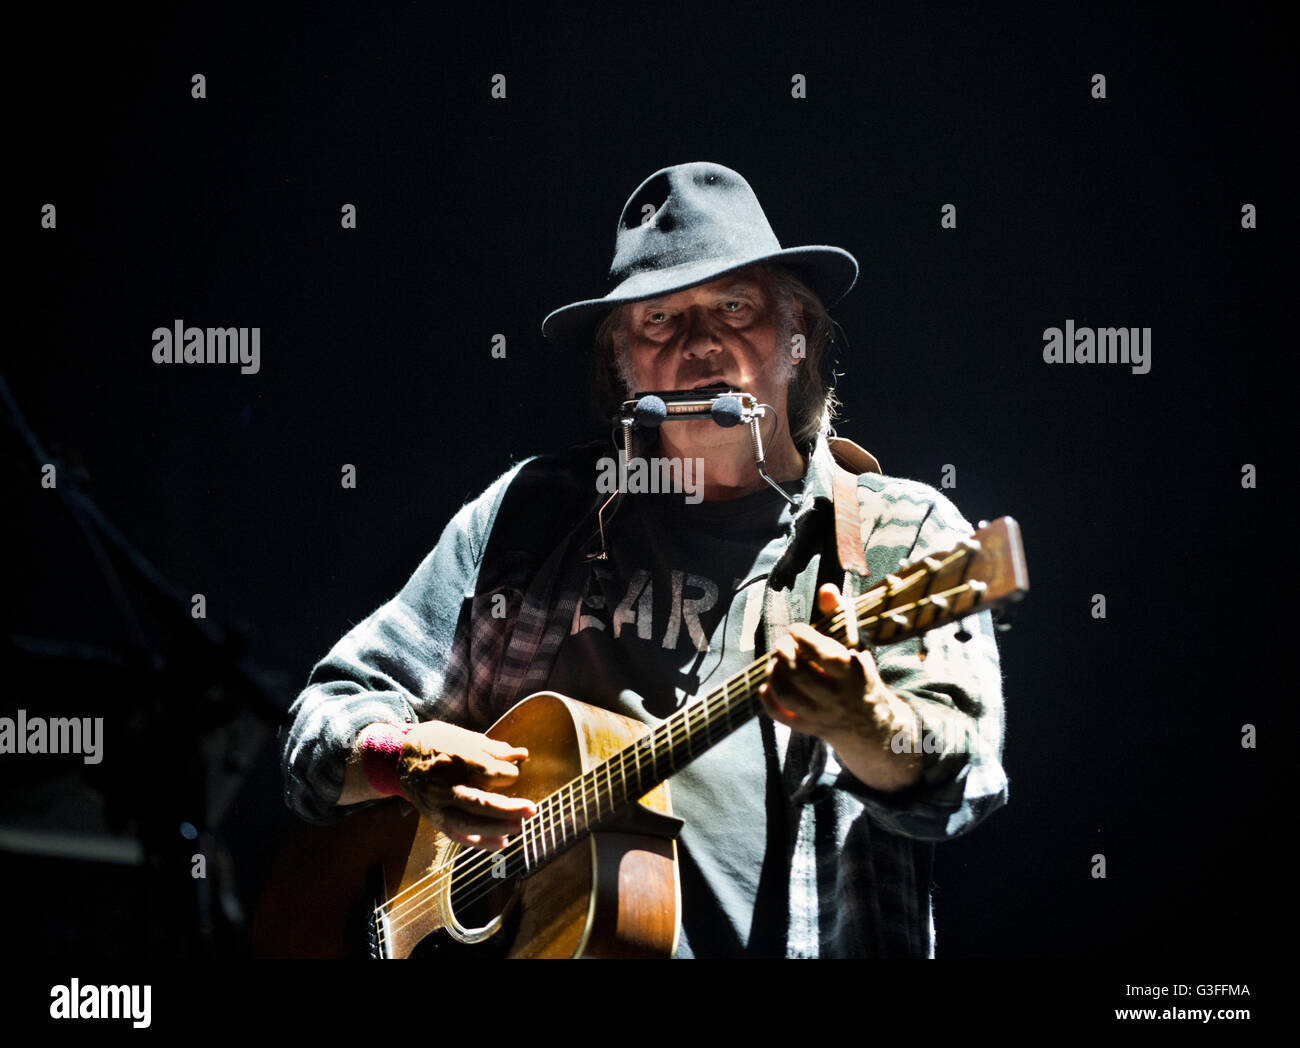 Leeds, UK. 10th June, 2016. Neil Young in concert at The First Direct Arena, Leeds. Stock Photo